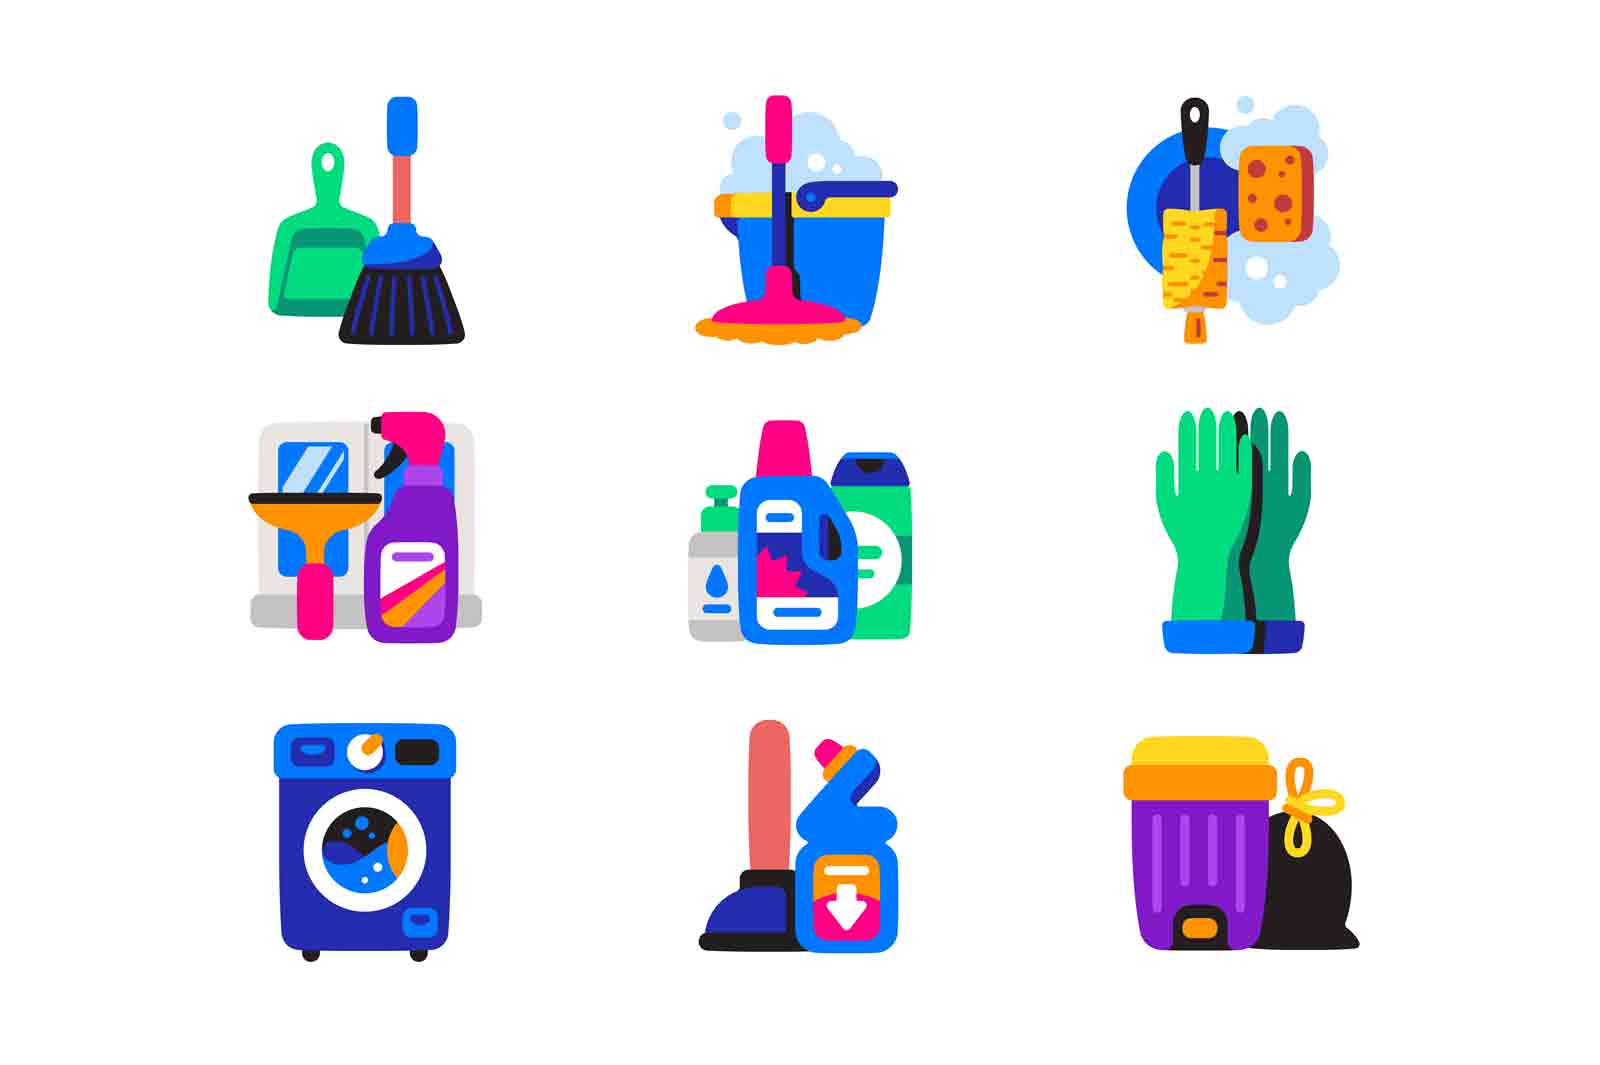 Cleaning supplies and tools icon set vector illustration. Detergents and equipment for cleanup. Household flat style concept